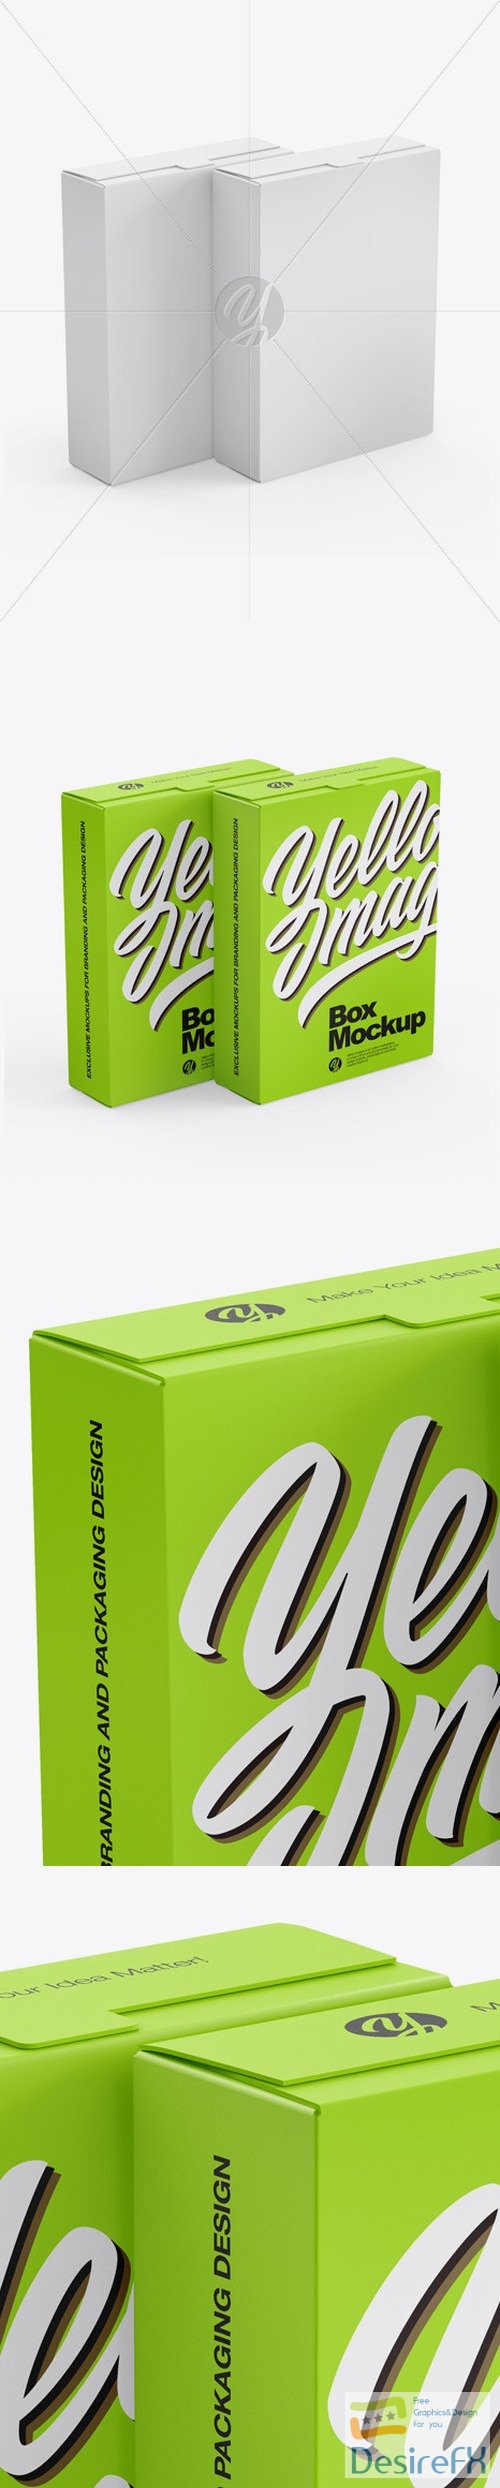 Two Paper Boxes Mockup 48749